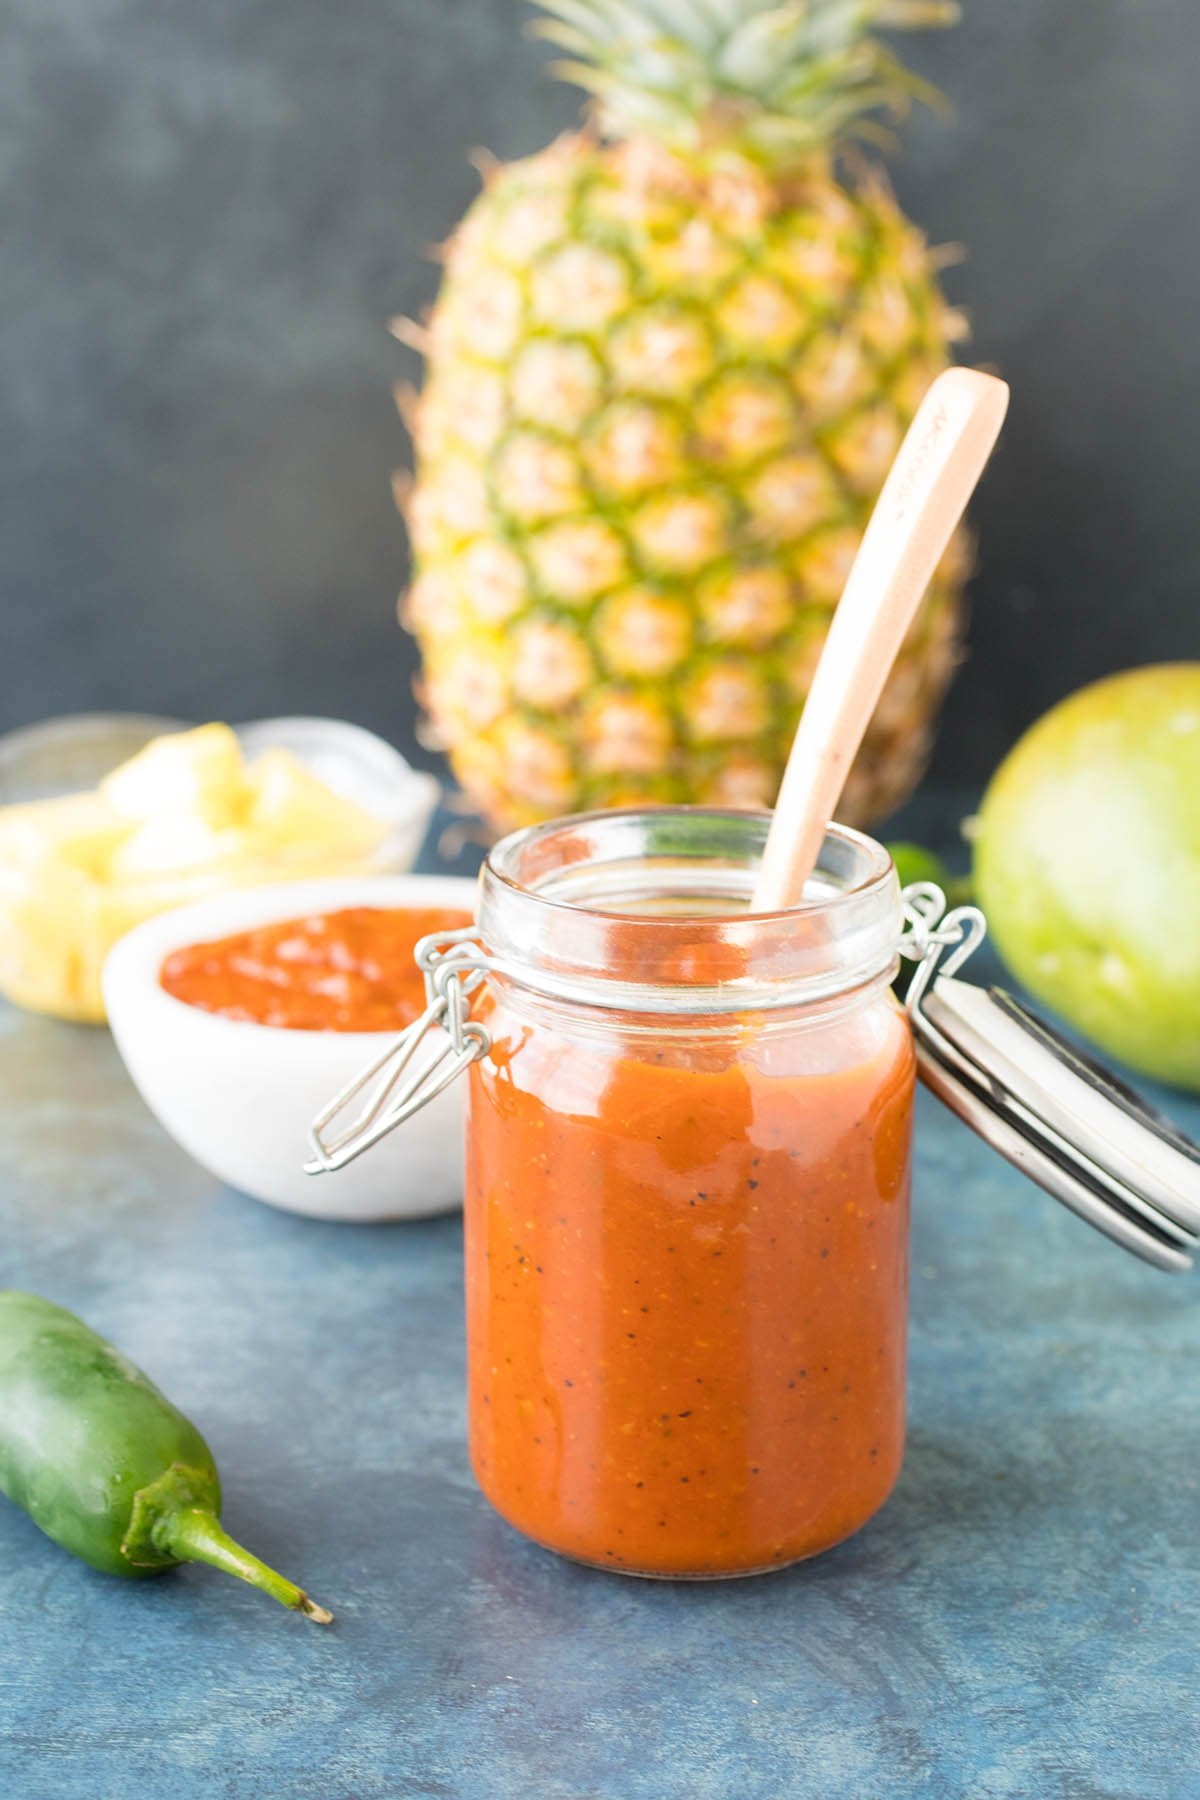 Pineapple-Mango Ketchup served in a jar